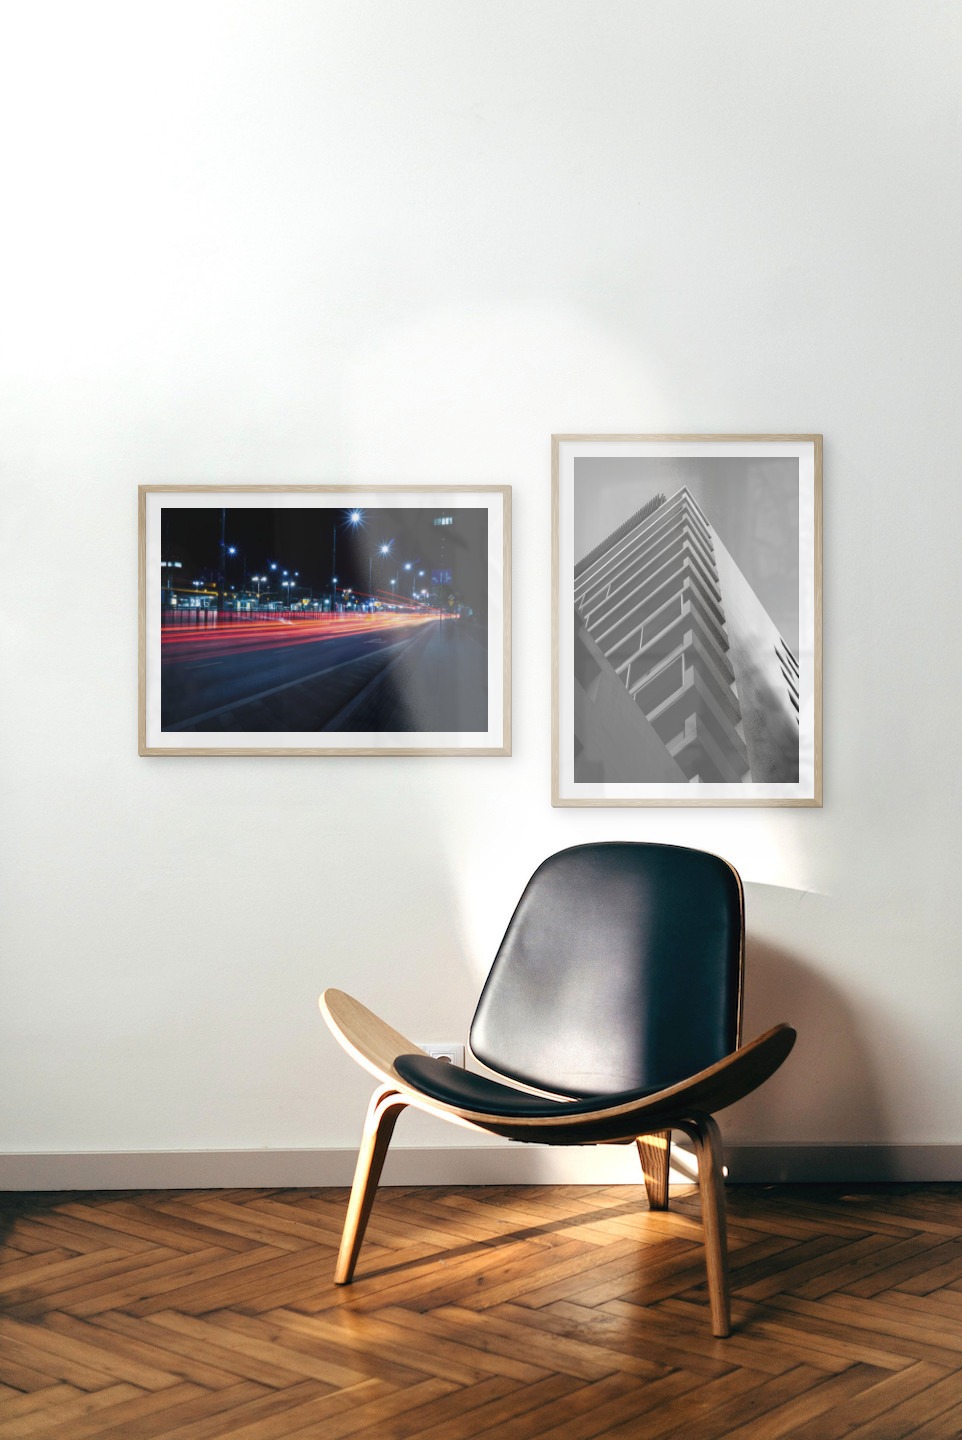 Gallery wall with picture frames in wood in sizes 50x70 with prints "Light on the way" and "Black and white building"